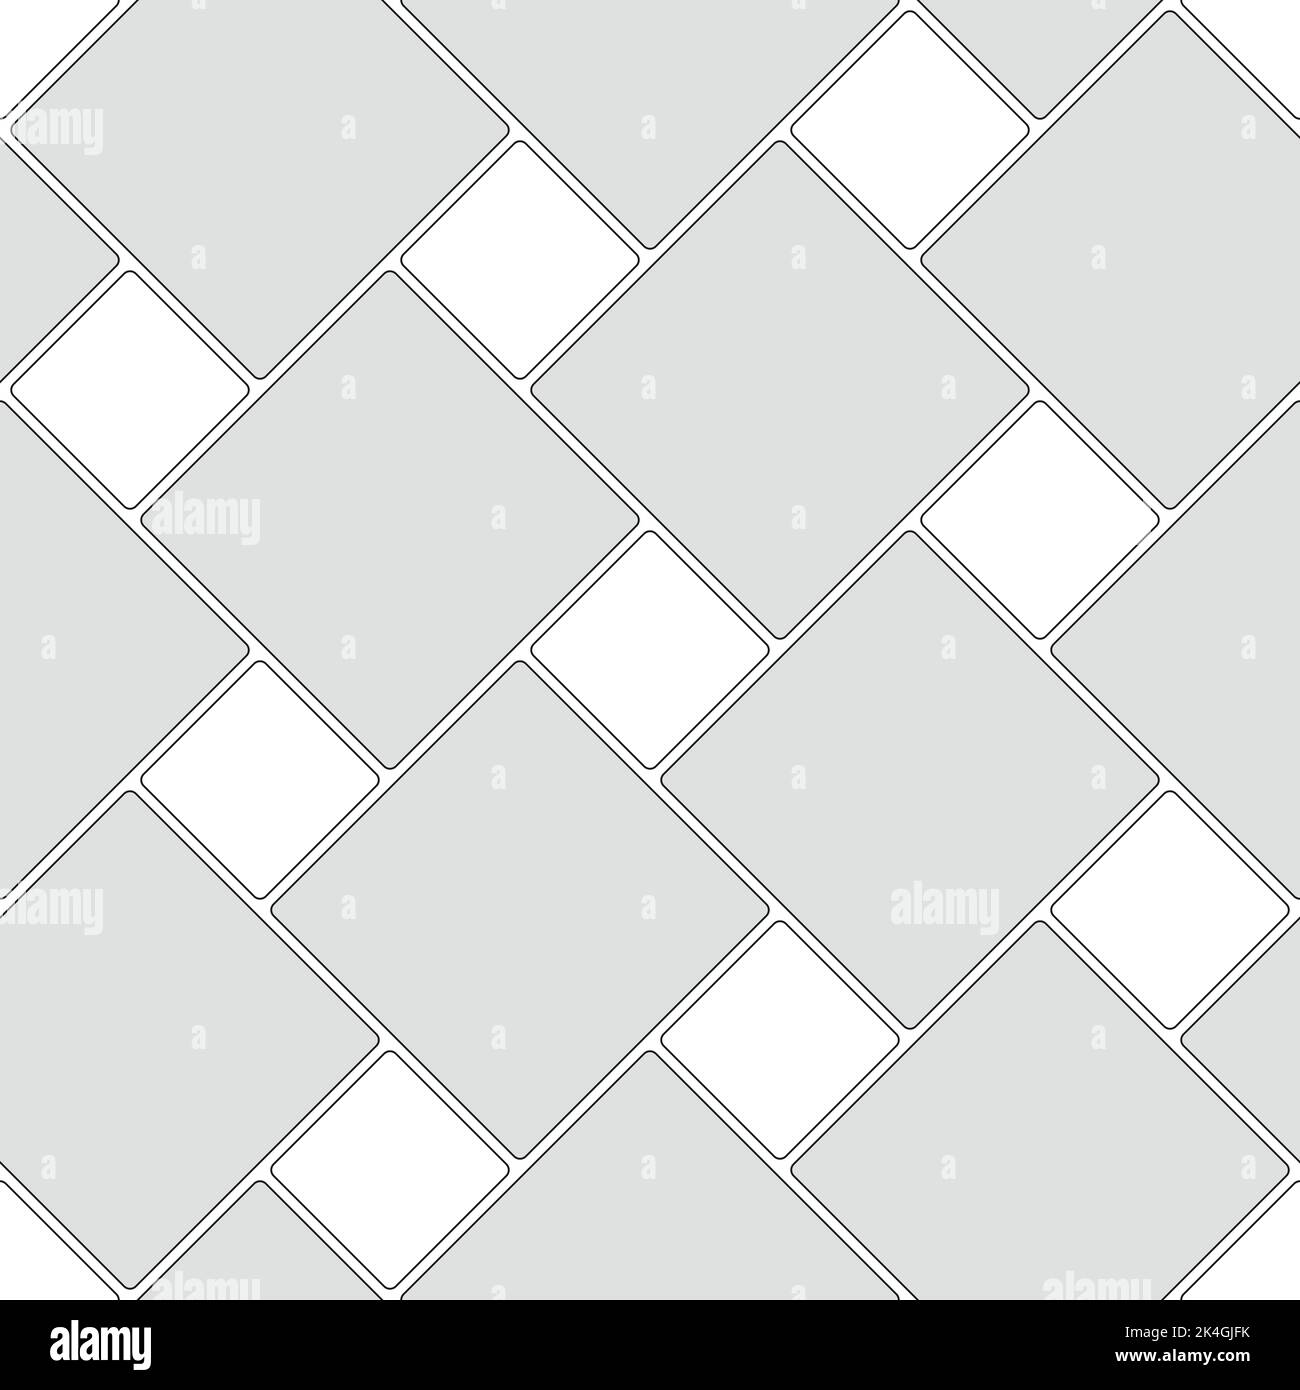 Seamless pattern of paving slabs. Large and small squares. Simple wallpaper with diagonal geometric print. Monochrome vector background. Stock Vector